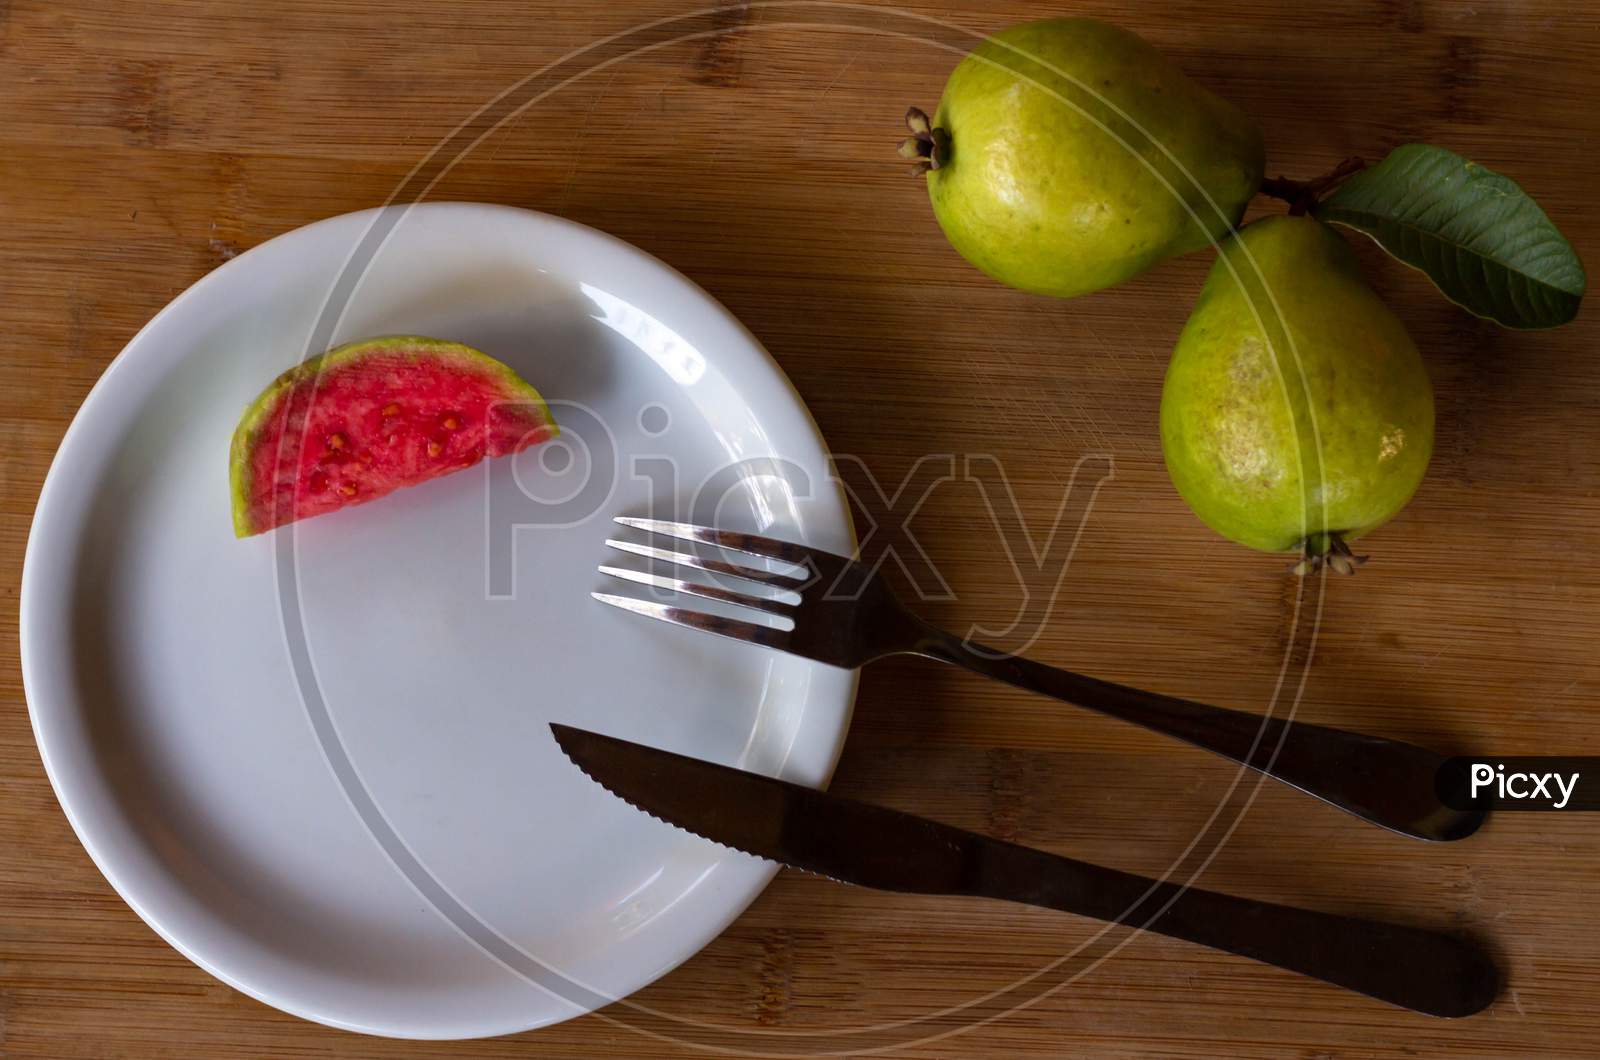 Two Exotic Fruits From Brazil Called Guava. A Piece Of Cut Fruit On A Plate With Fork And Knife. Wood Background.